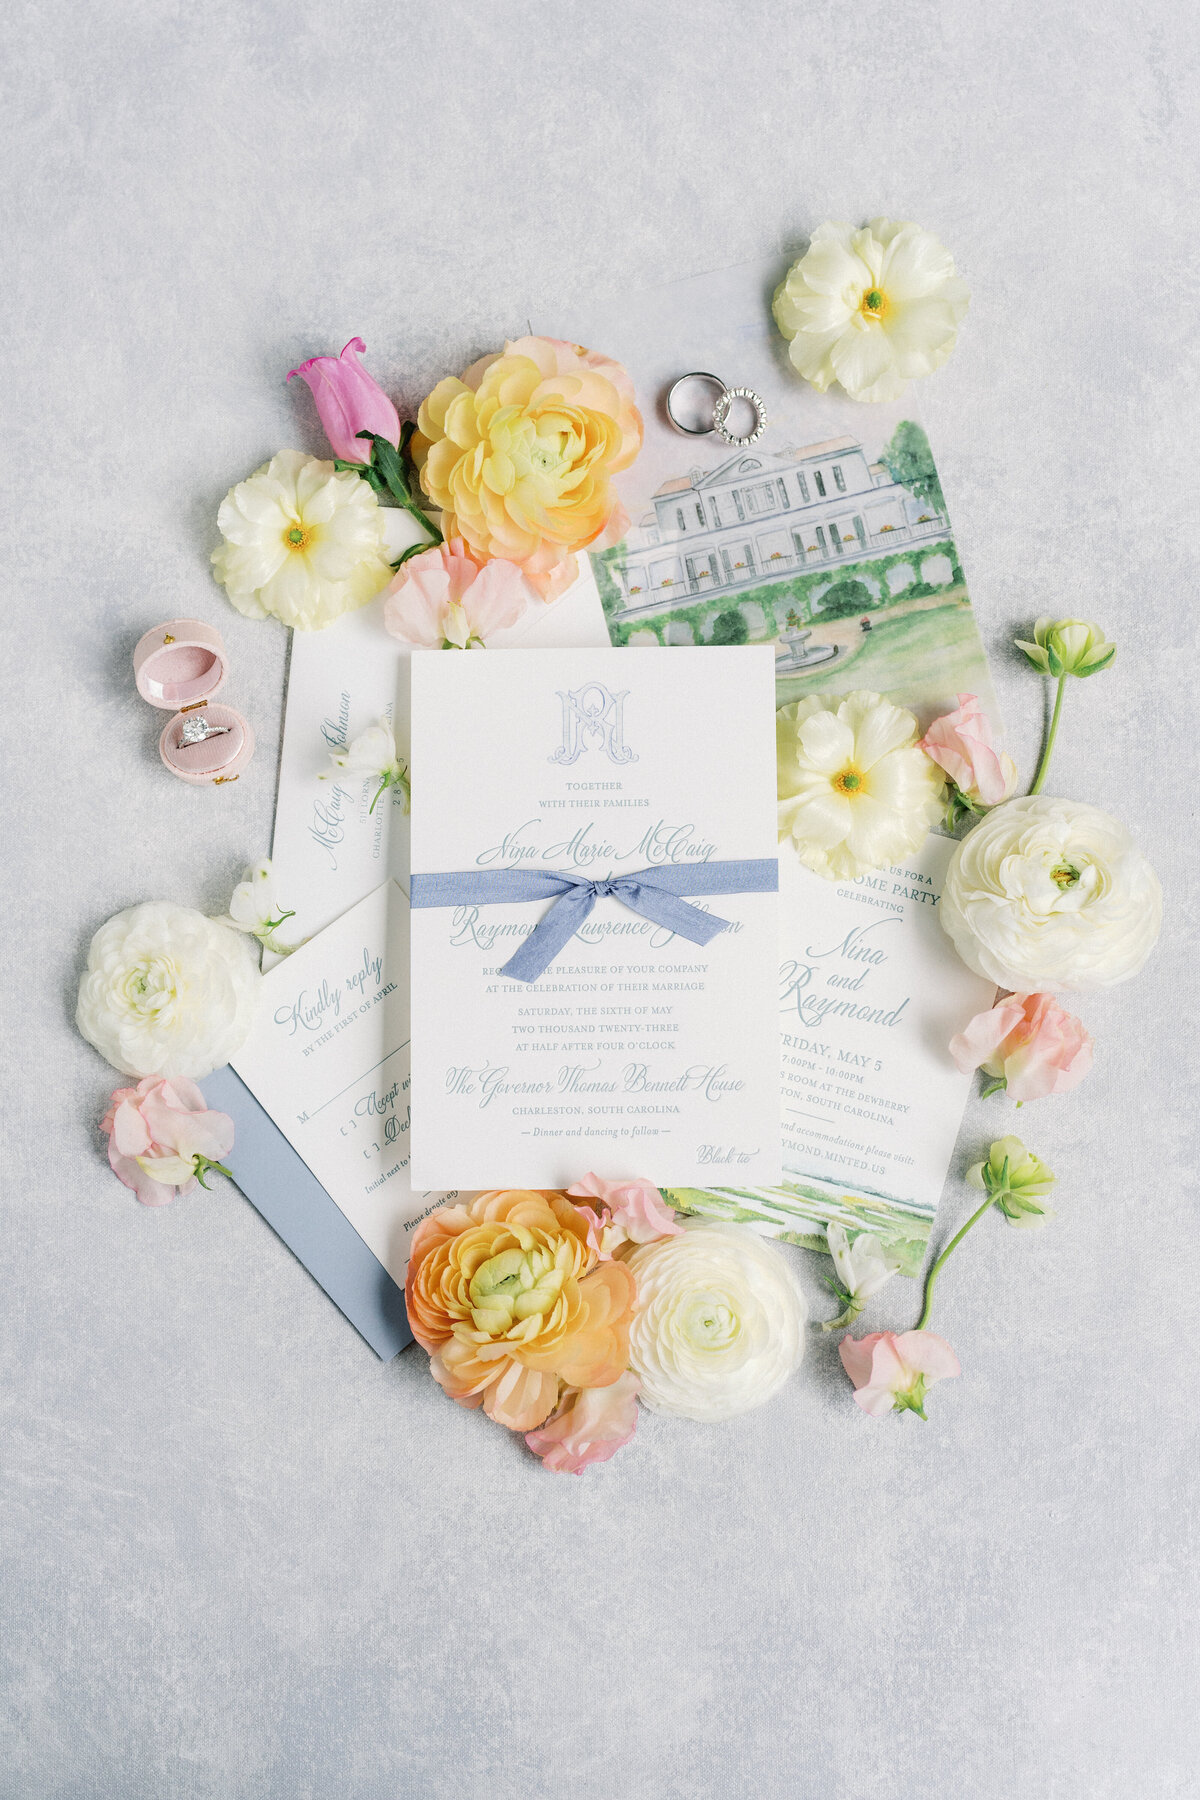 Wedding day details. Blue and white wedding invitations with a touch of yellow and green. Charleston spring destination wedding. Film photographer.